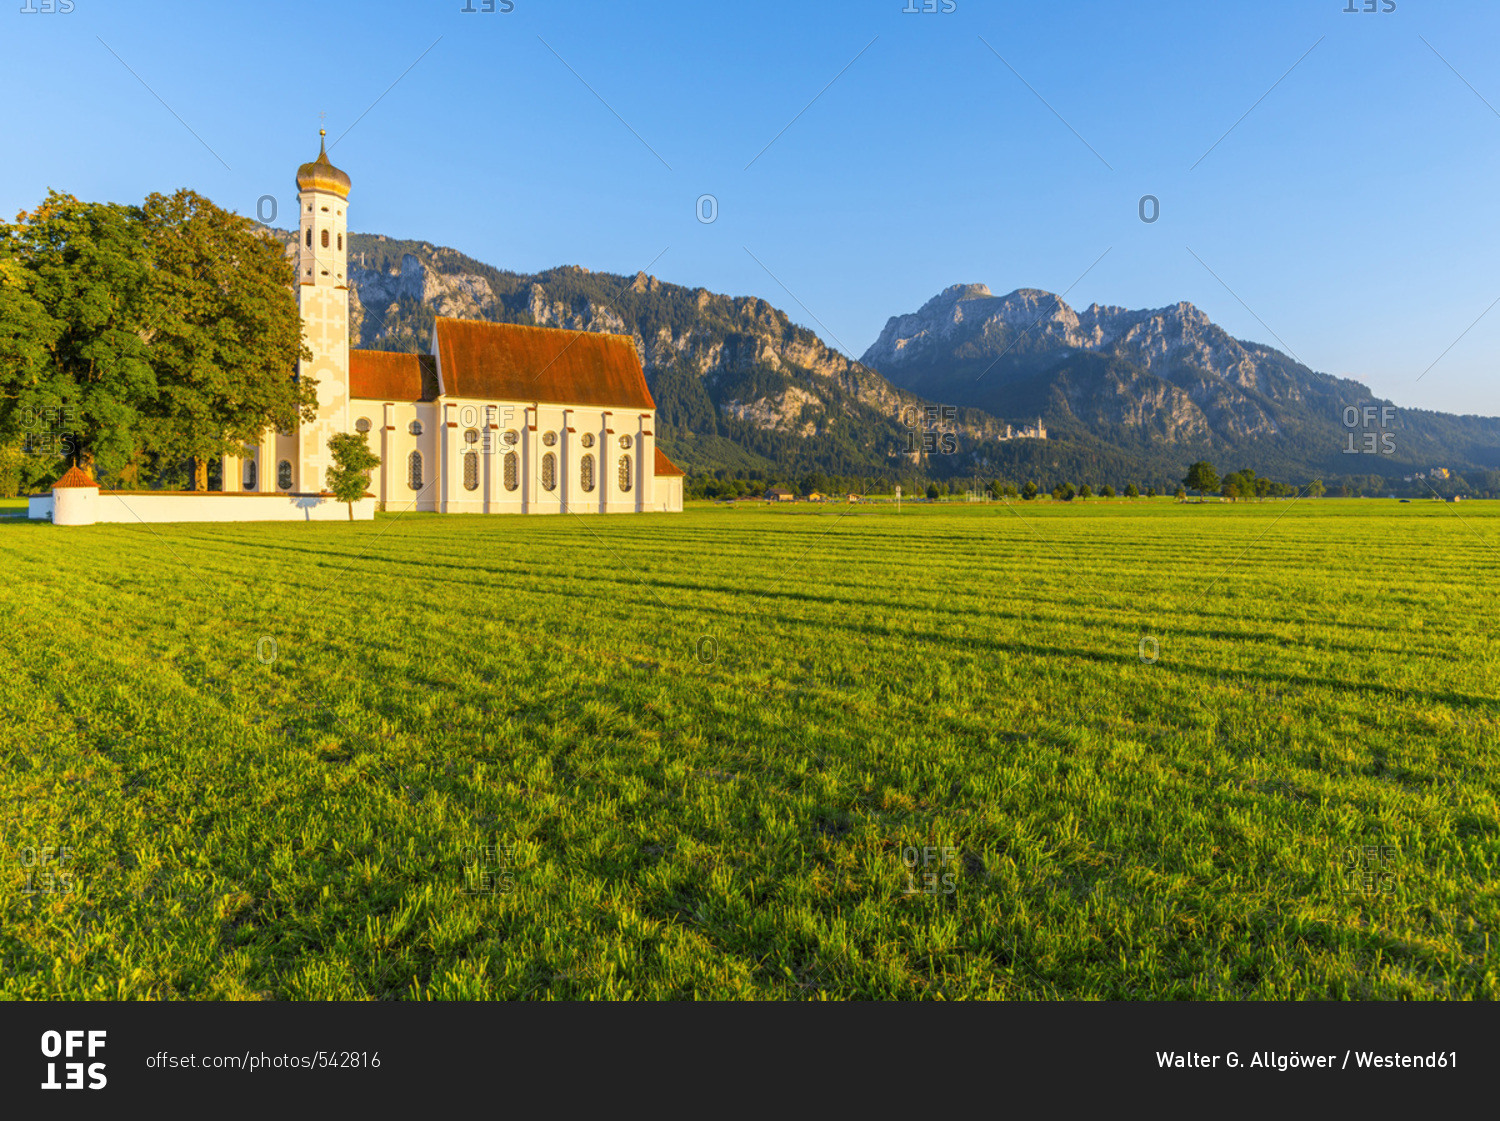 Germany- Schwangau- pilgrimage church St. Coloman- Neuschwanstein Castle and mountain Saeuling in background